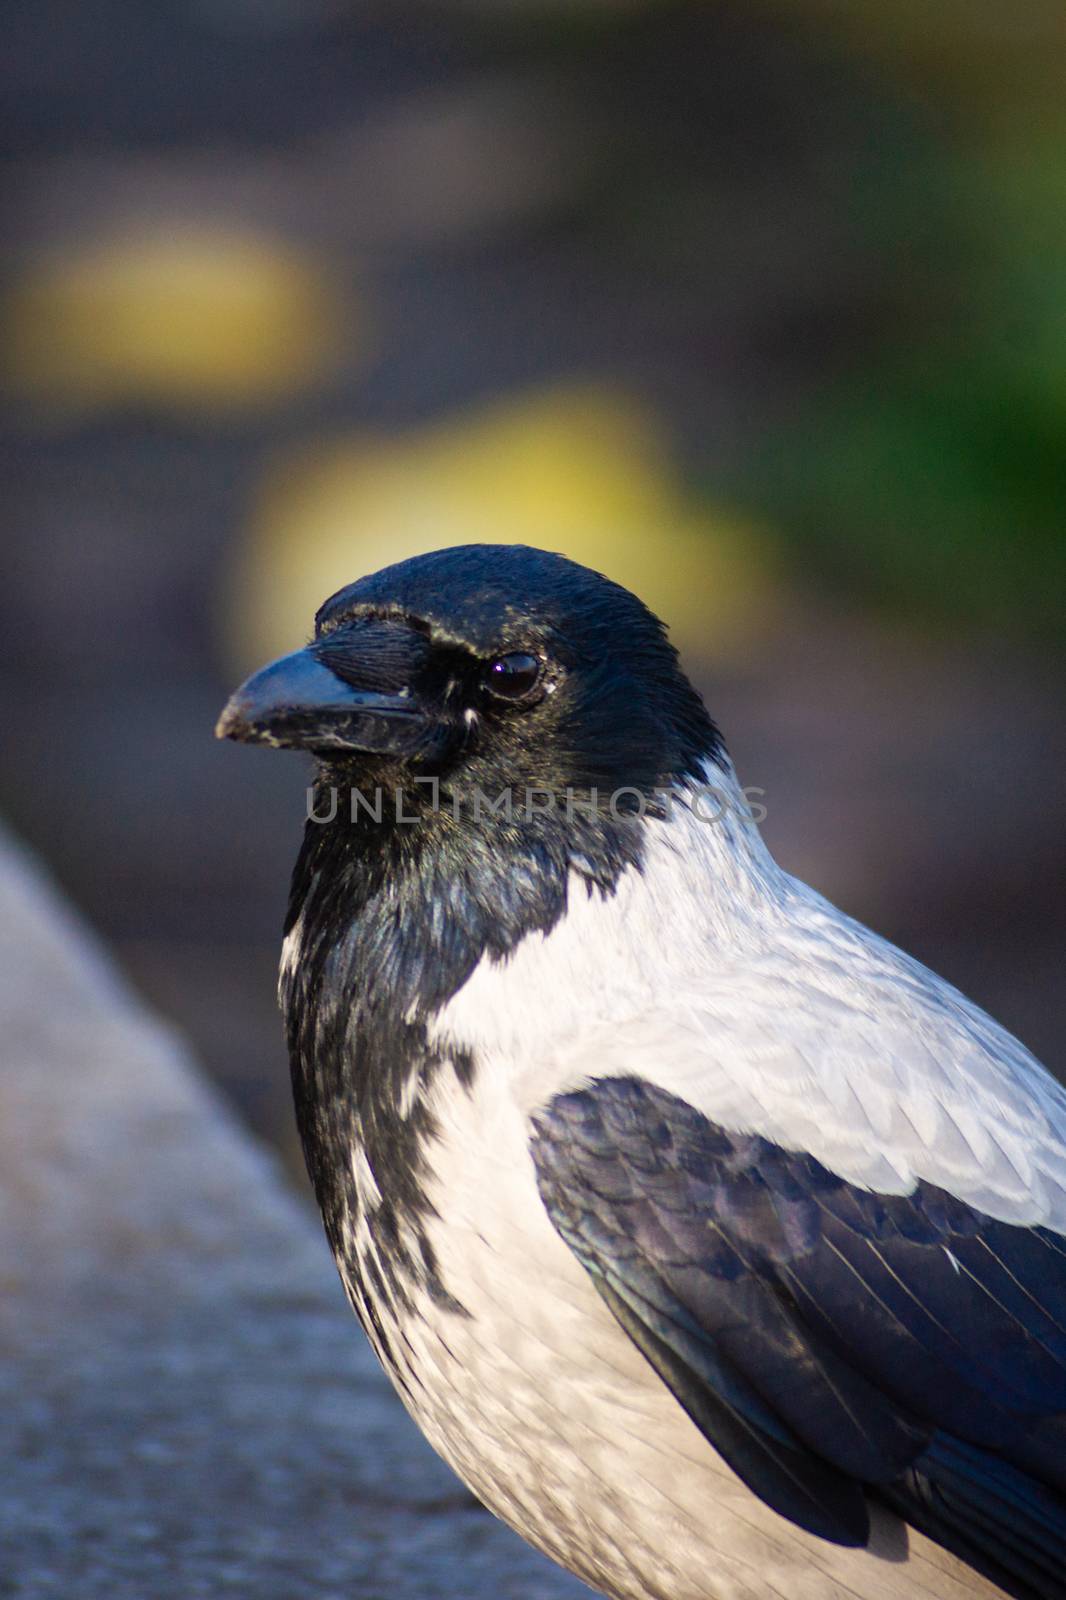 The city crow with black anf gray feathers on stone border with blurred background.